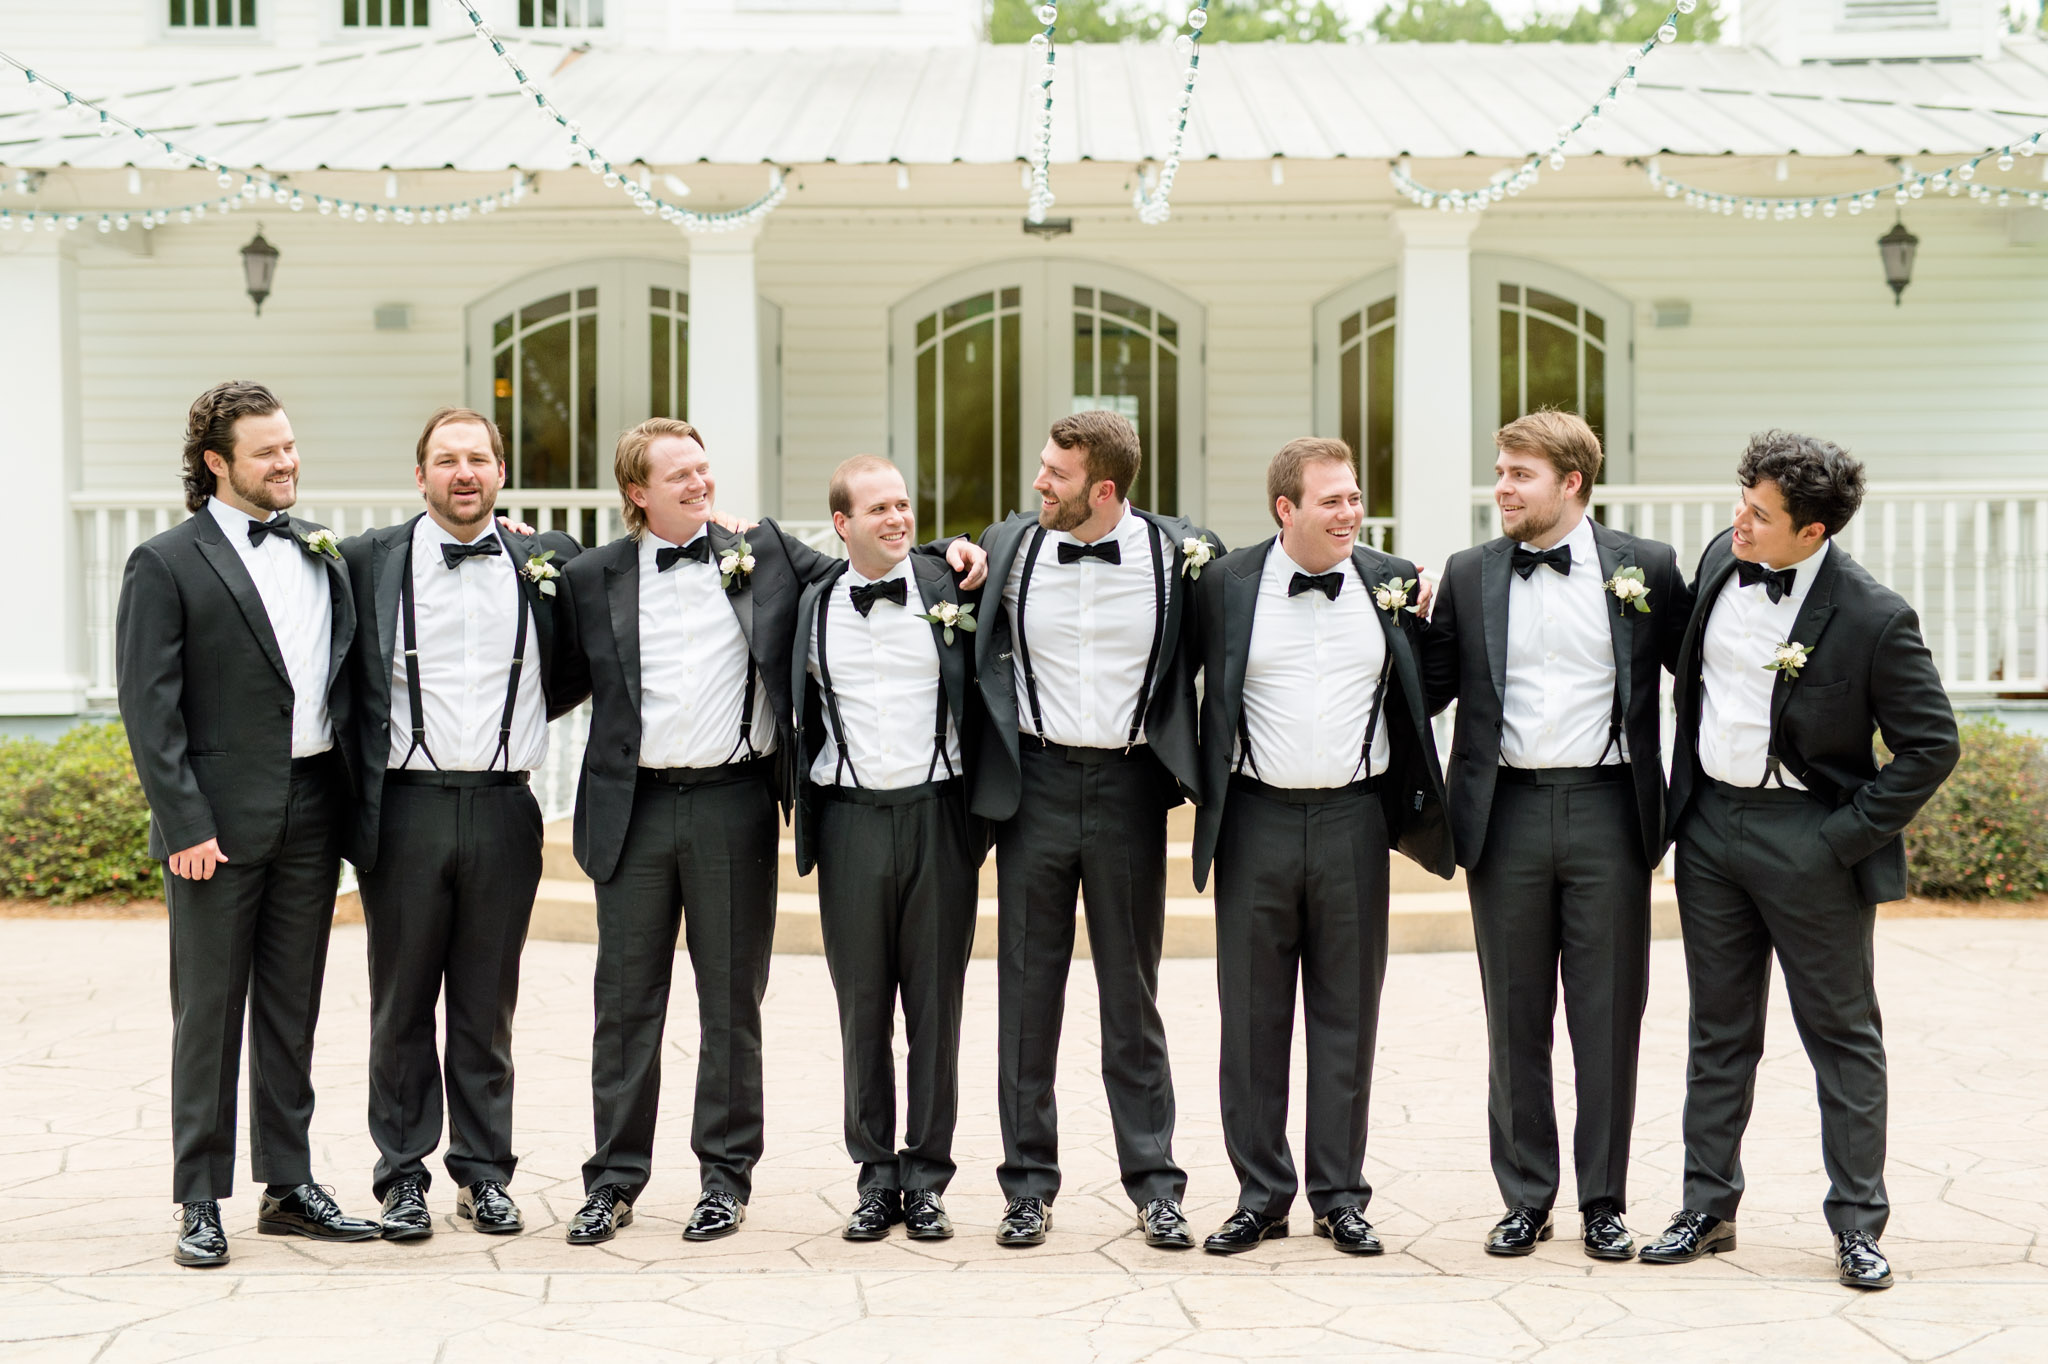 Groom and groomsmen laugh together